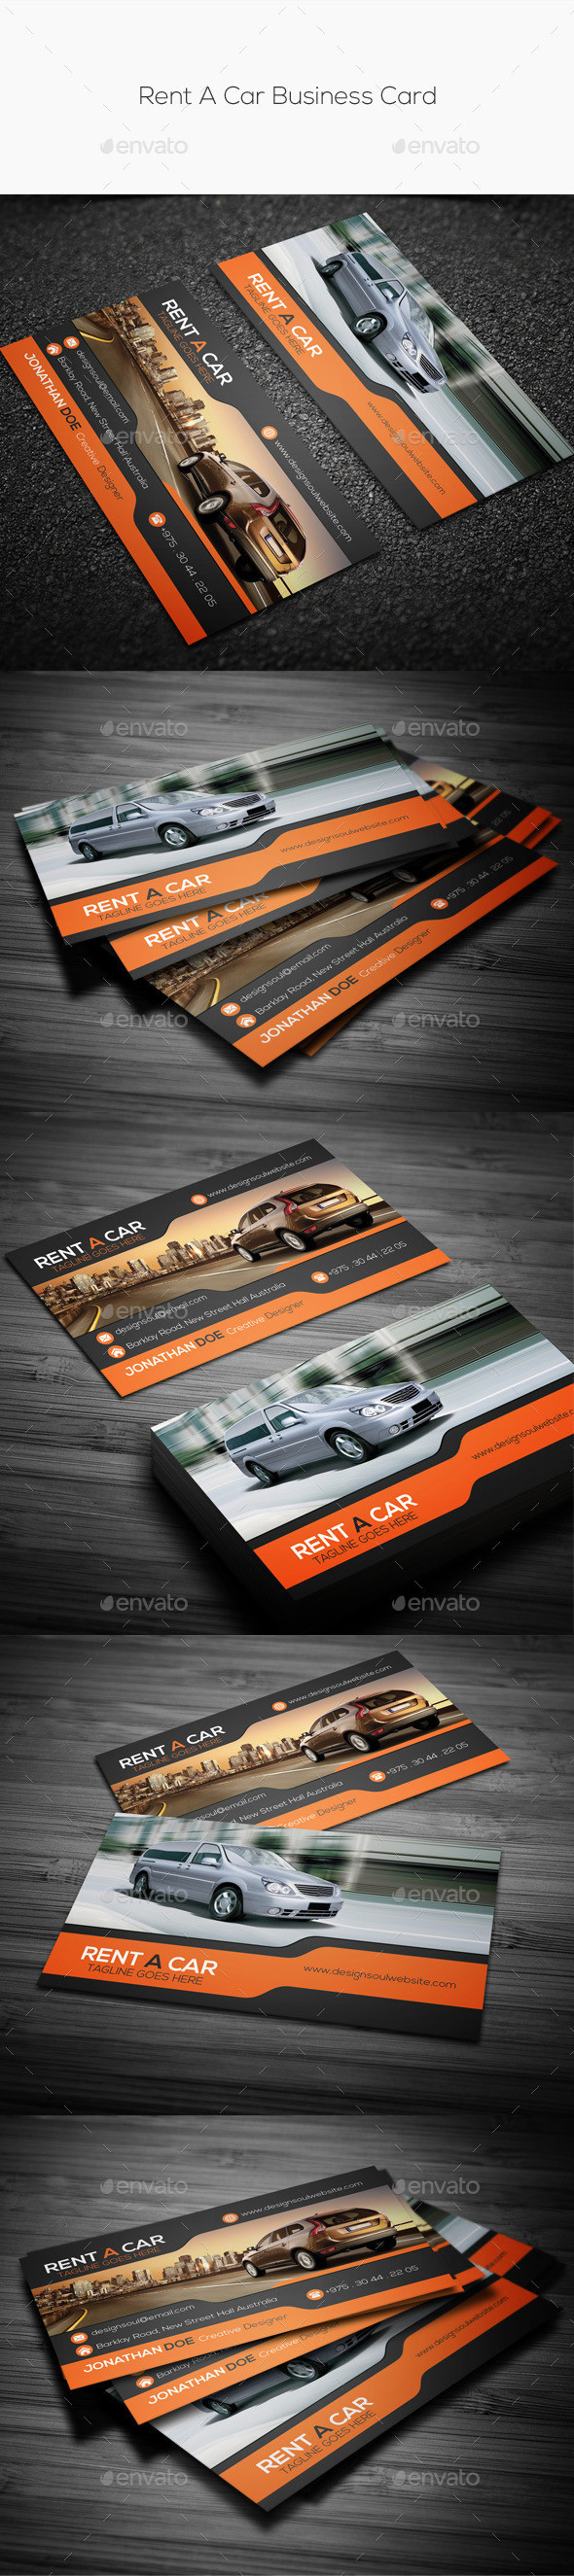 Rent a car business card preview